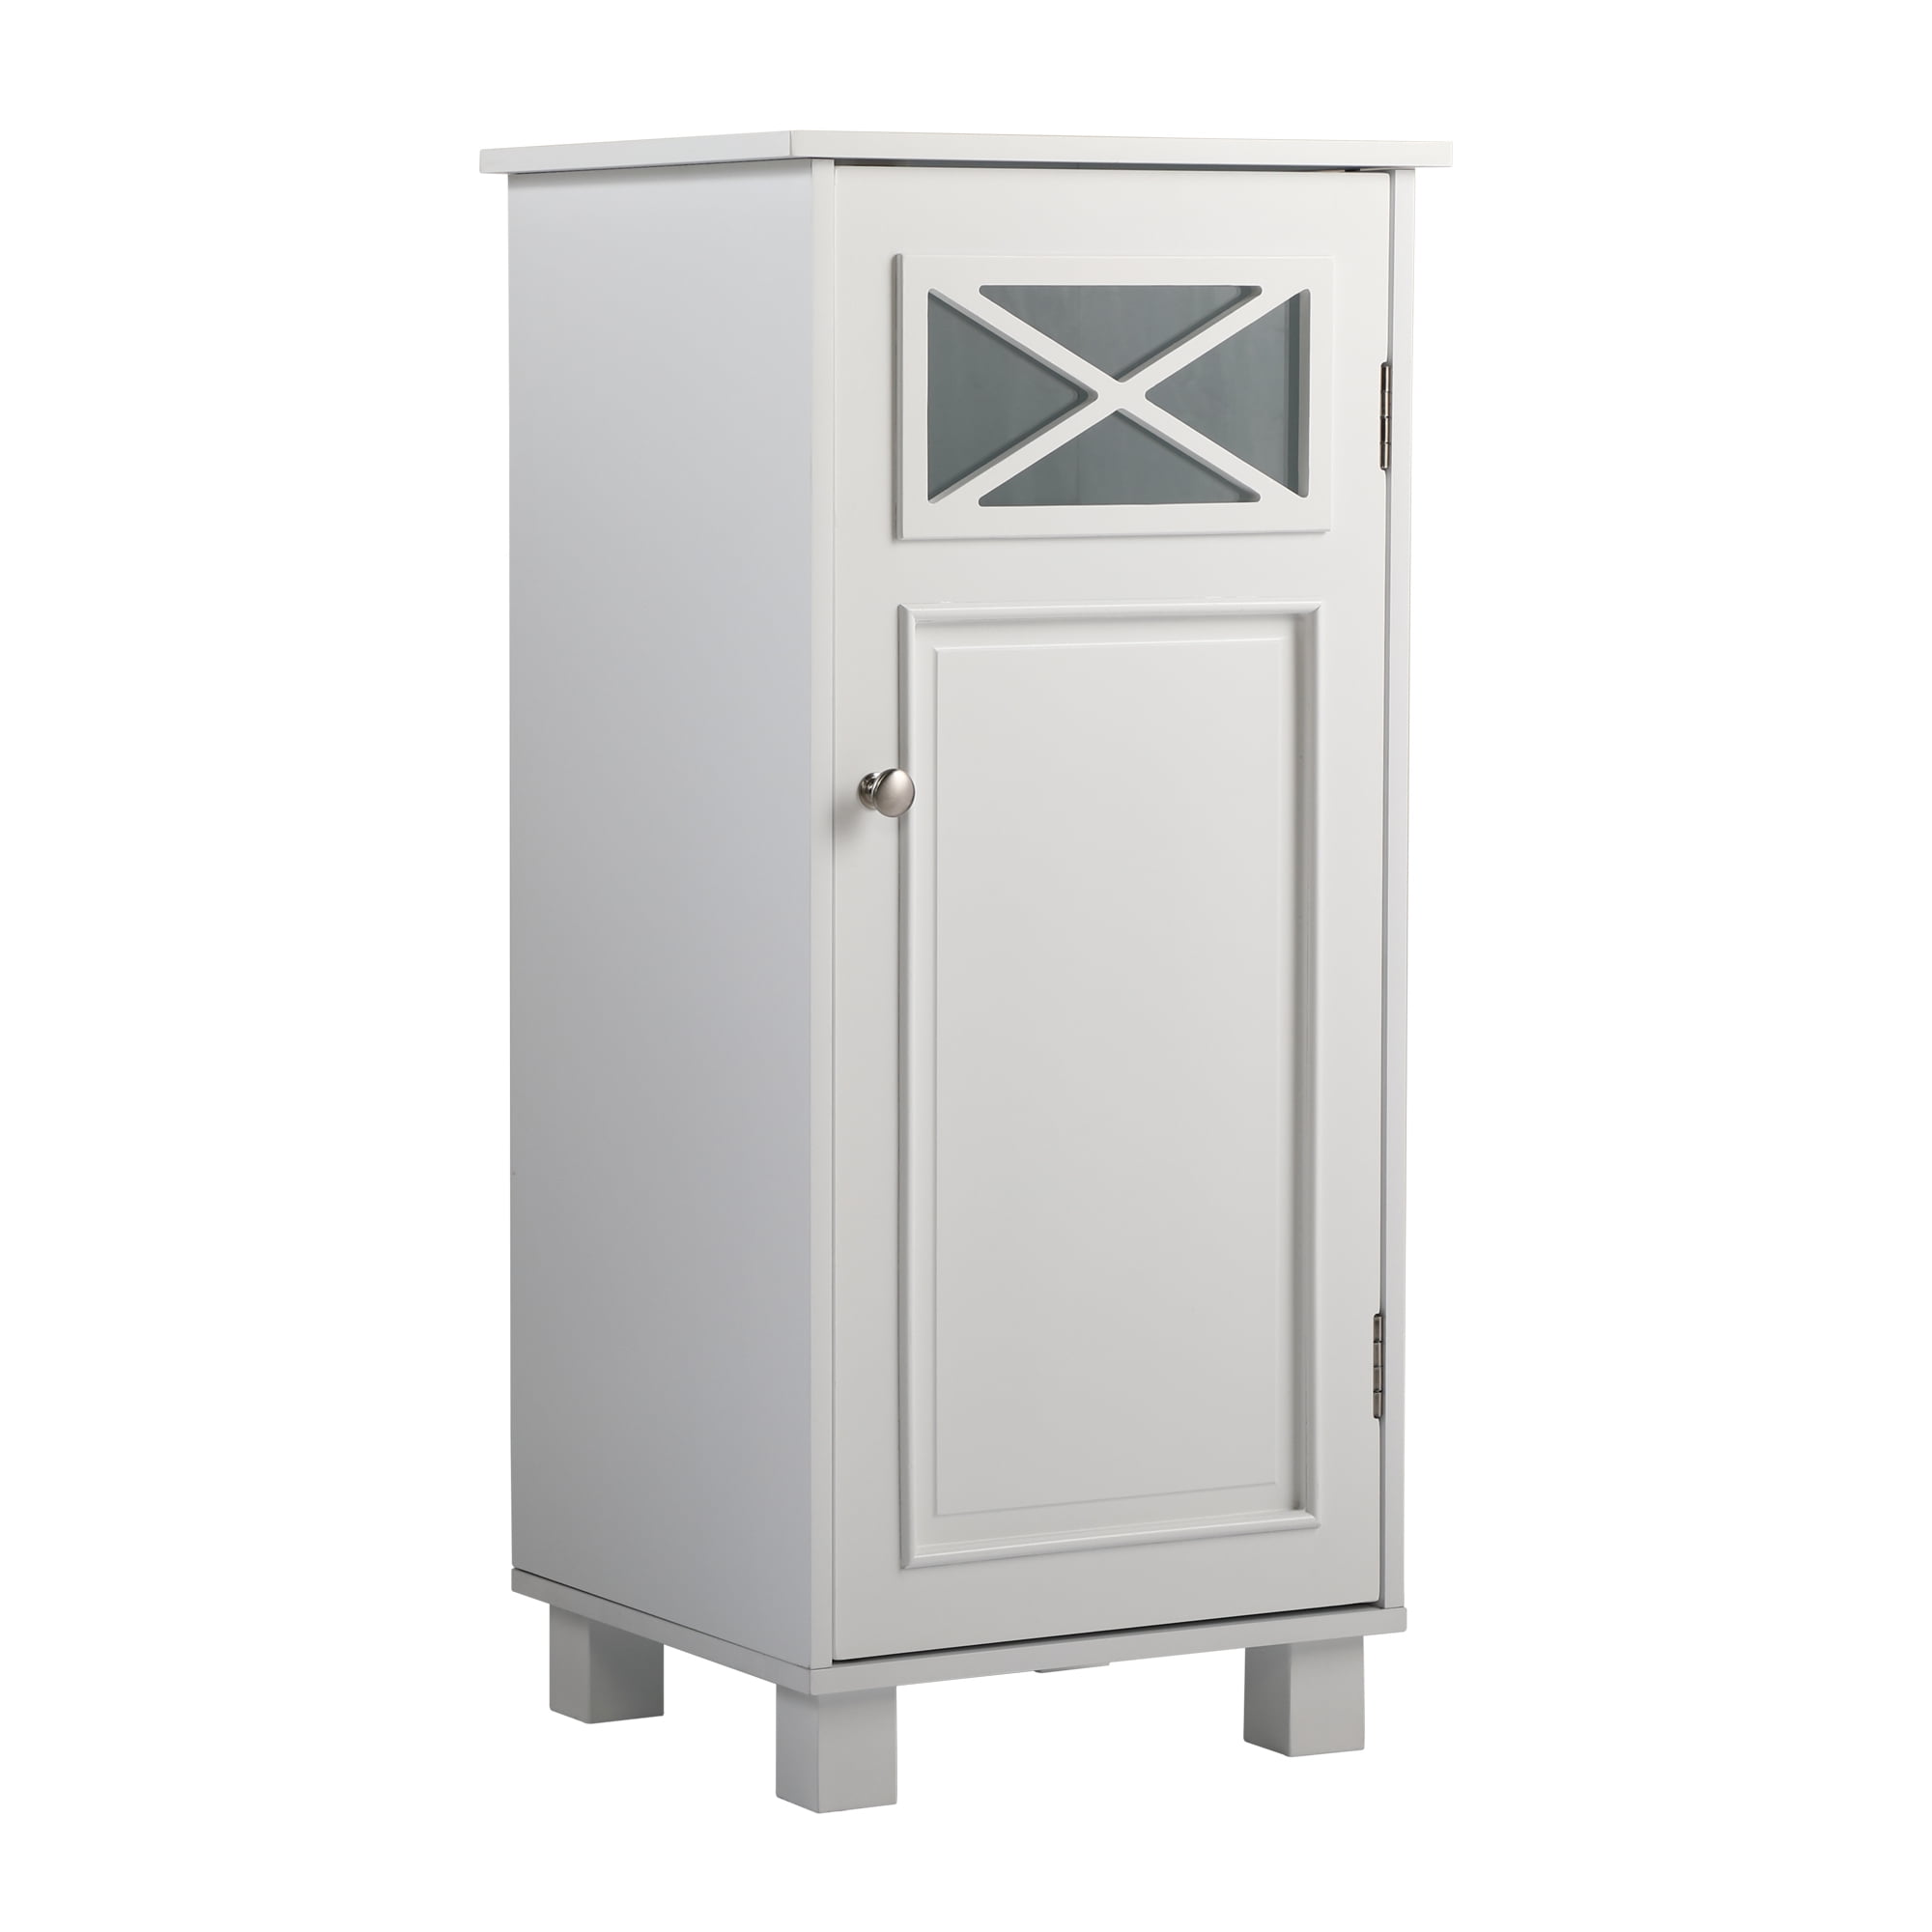 W x D x H YOUKE Bathroom Cabinet Storage Cupboard Wooden Unit with 3 Storage Shelves,modern Style Floor Standing Cabinet White 40 x 32 x 160 cm 